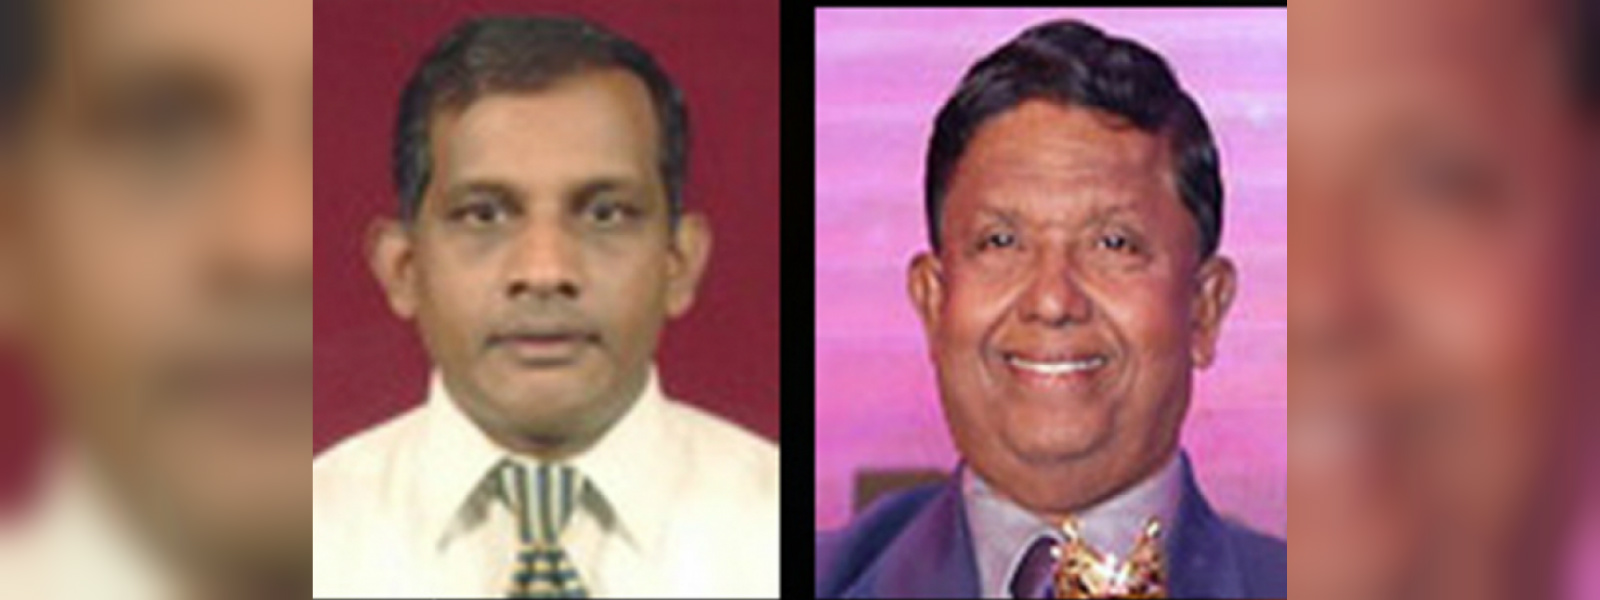 Case against Mahanama and Dissanayake on the 19th